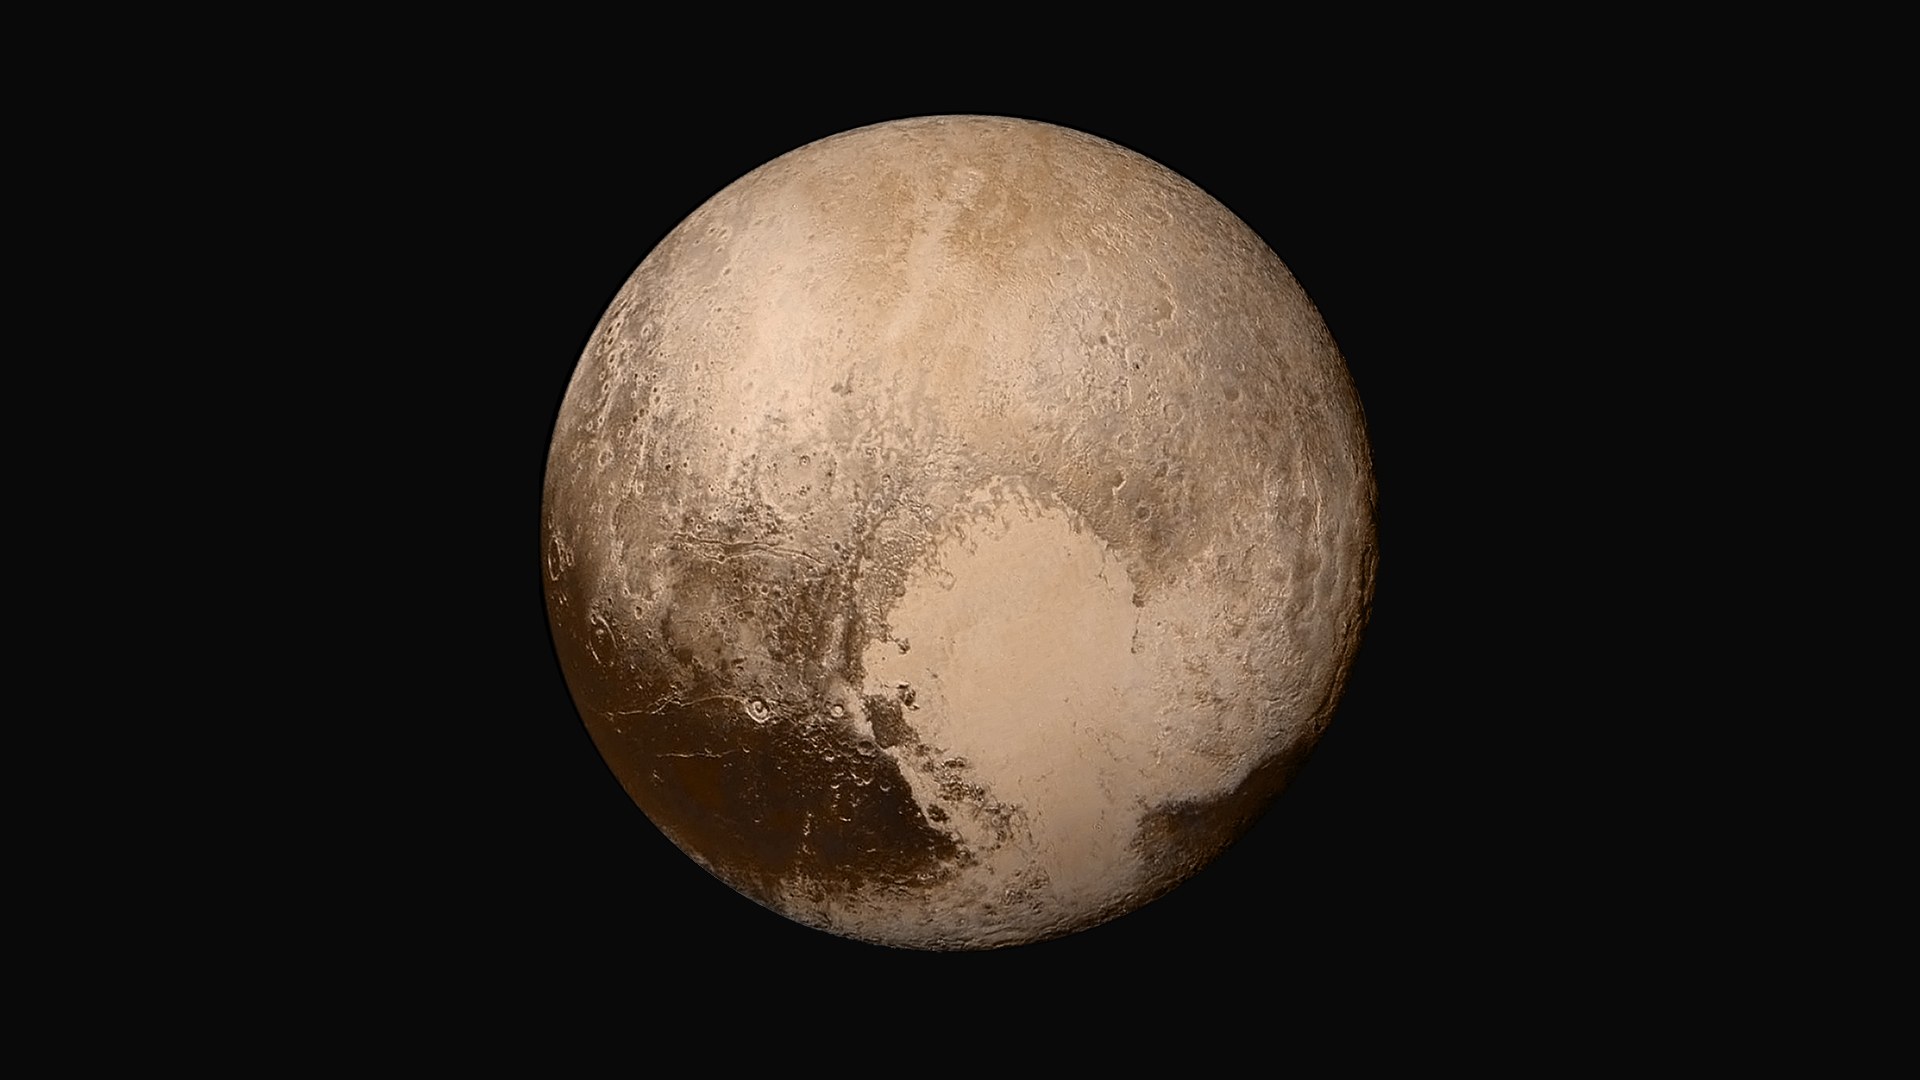 Pluto in true colours, photographed by New Horizons